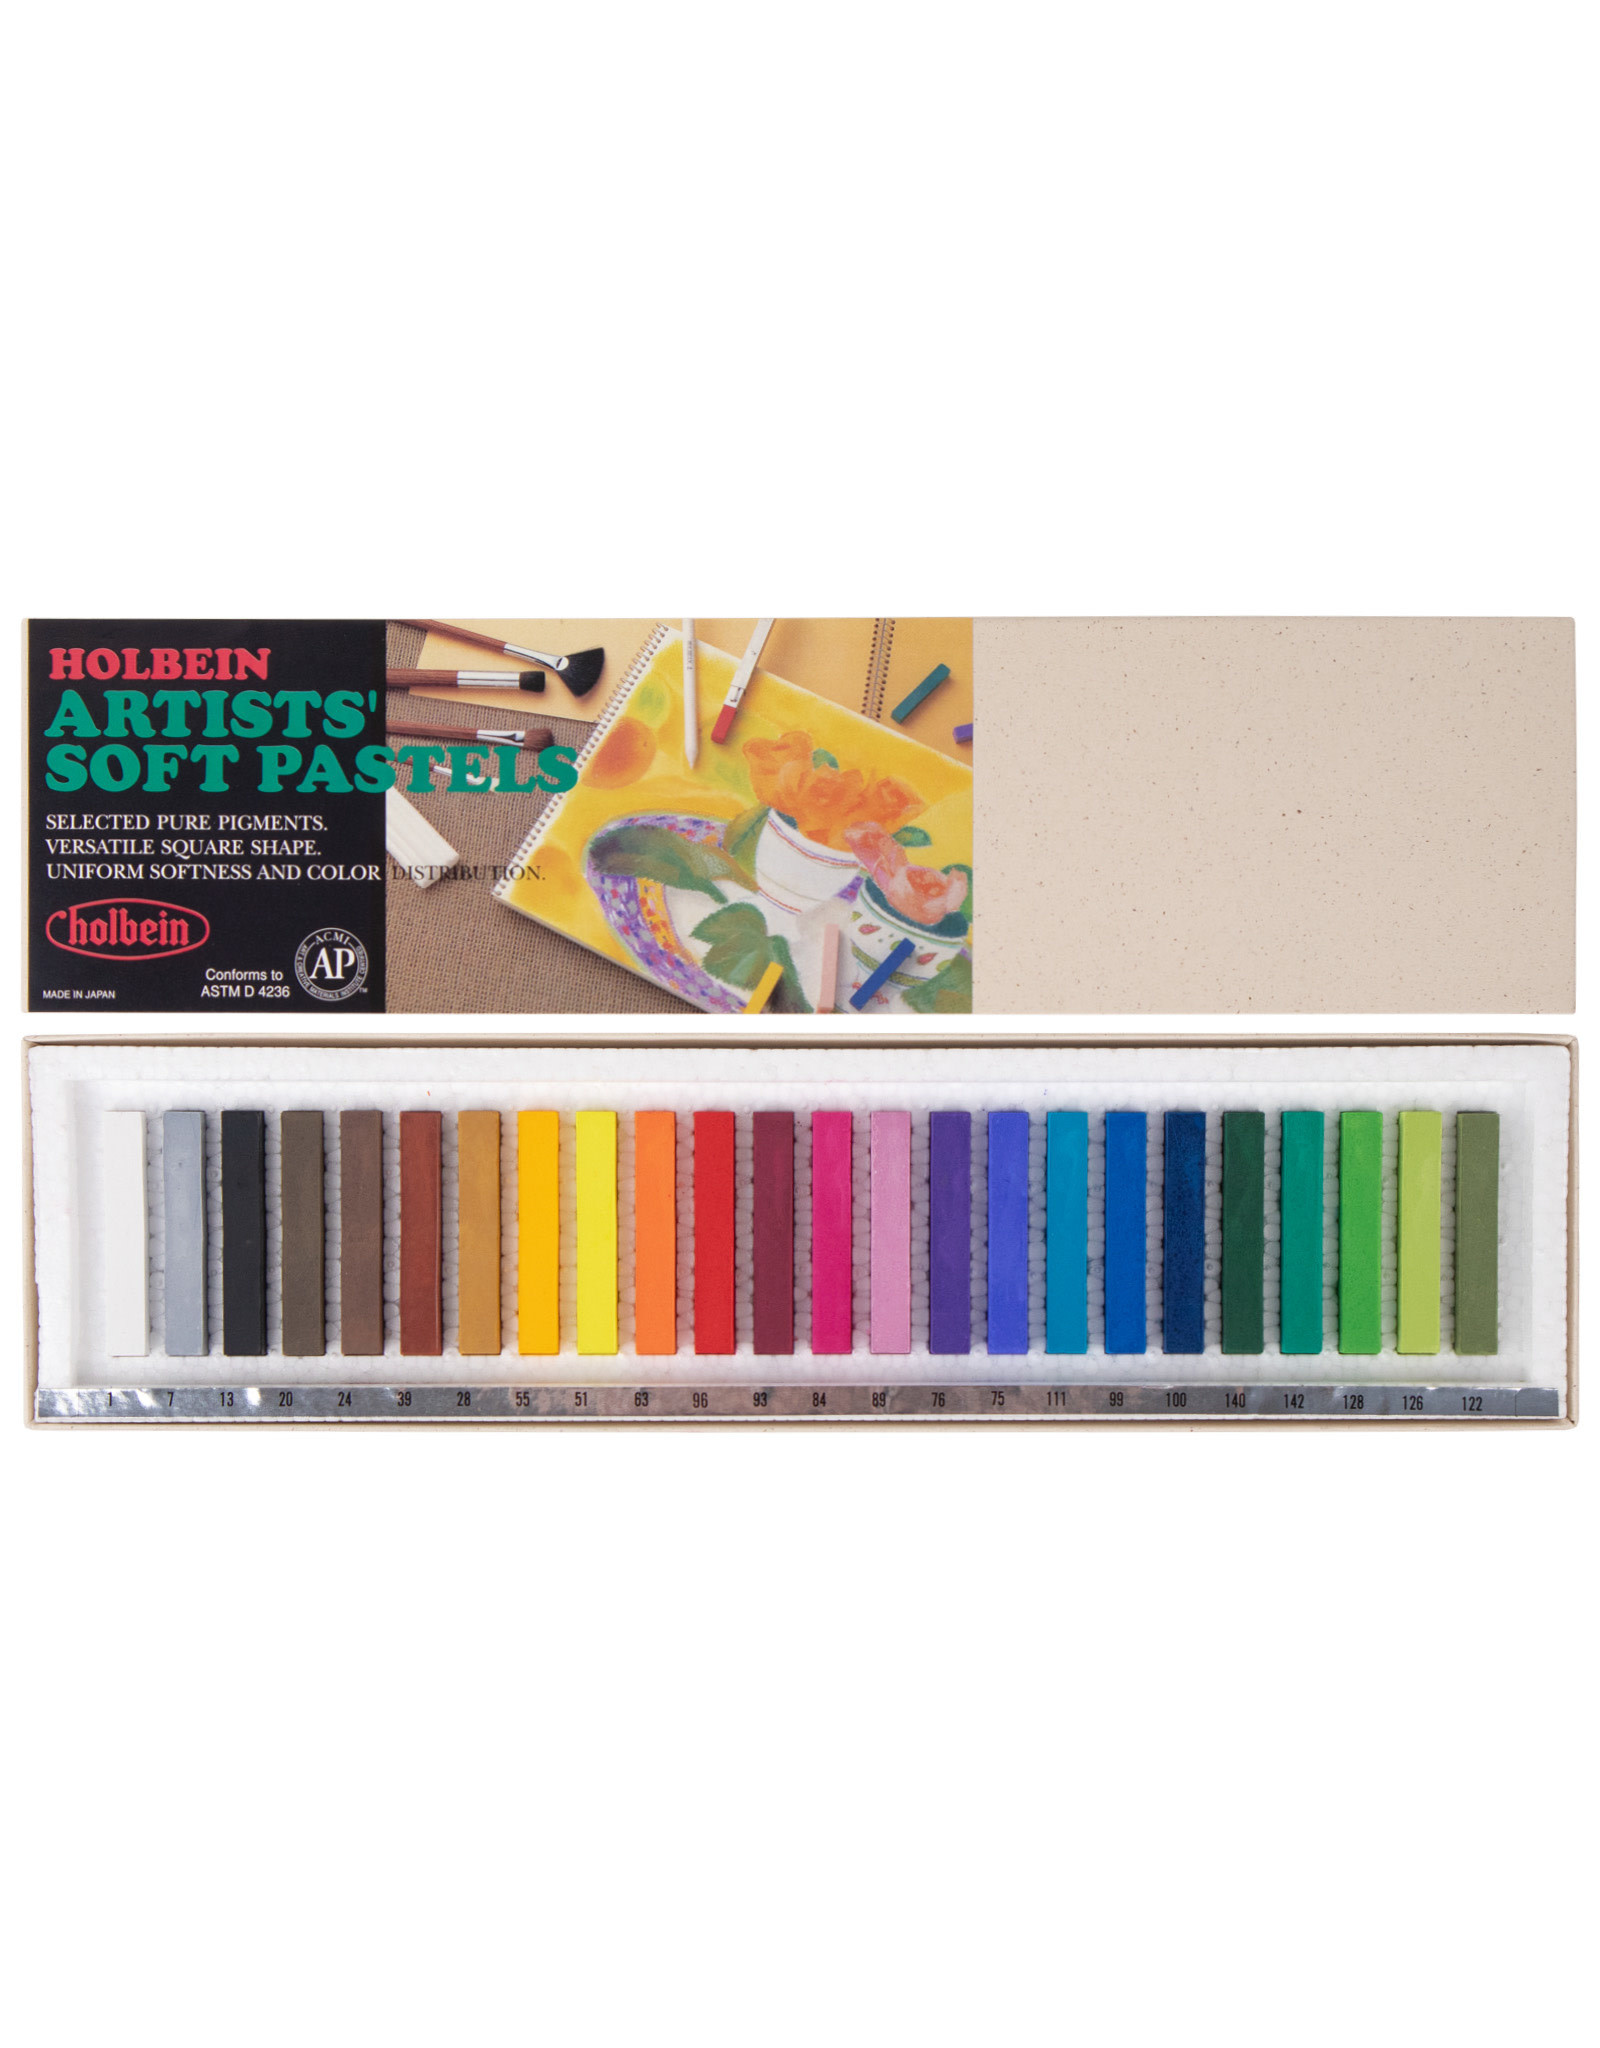 Daler Rowney Simply Complete Art Set with Easel 96pc I Art Gifts I